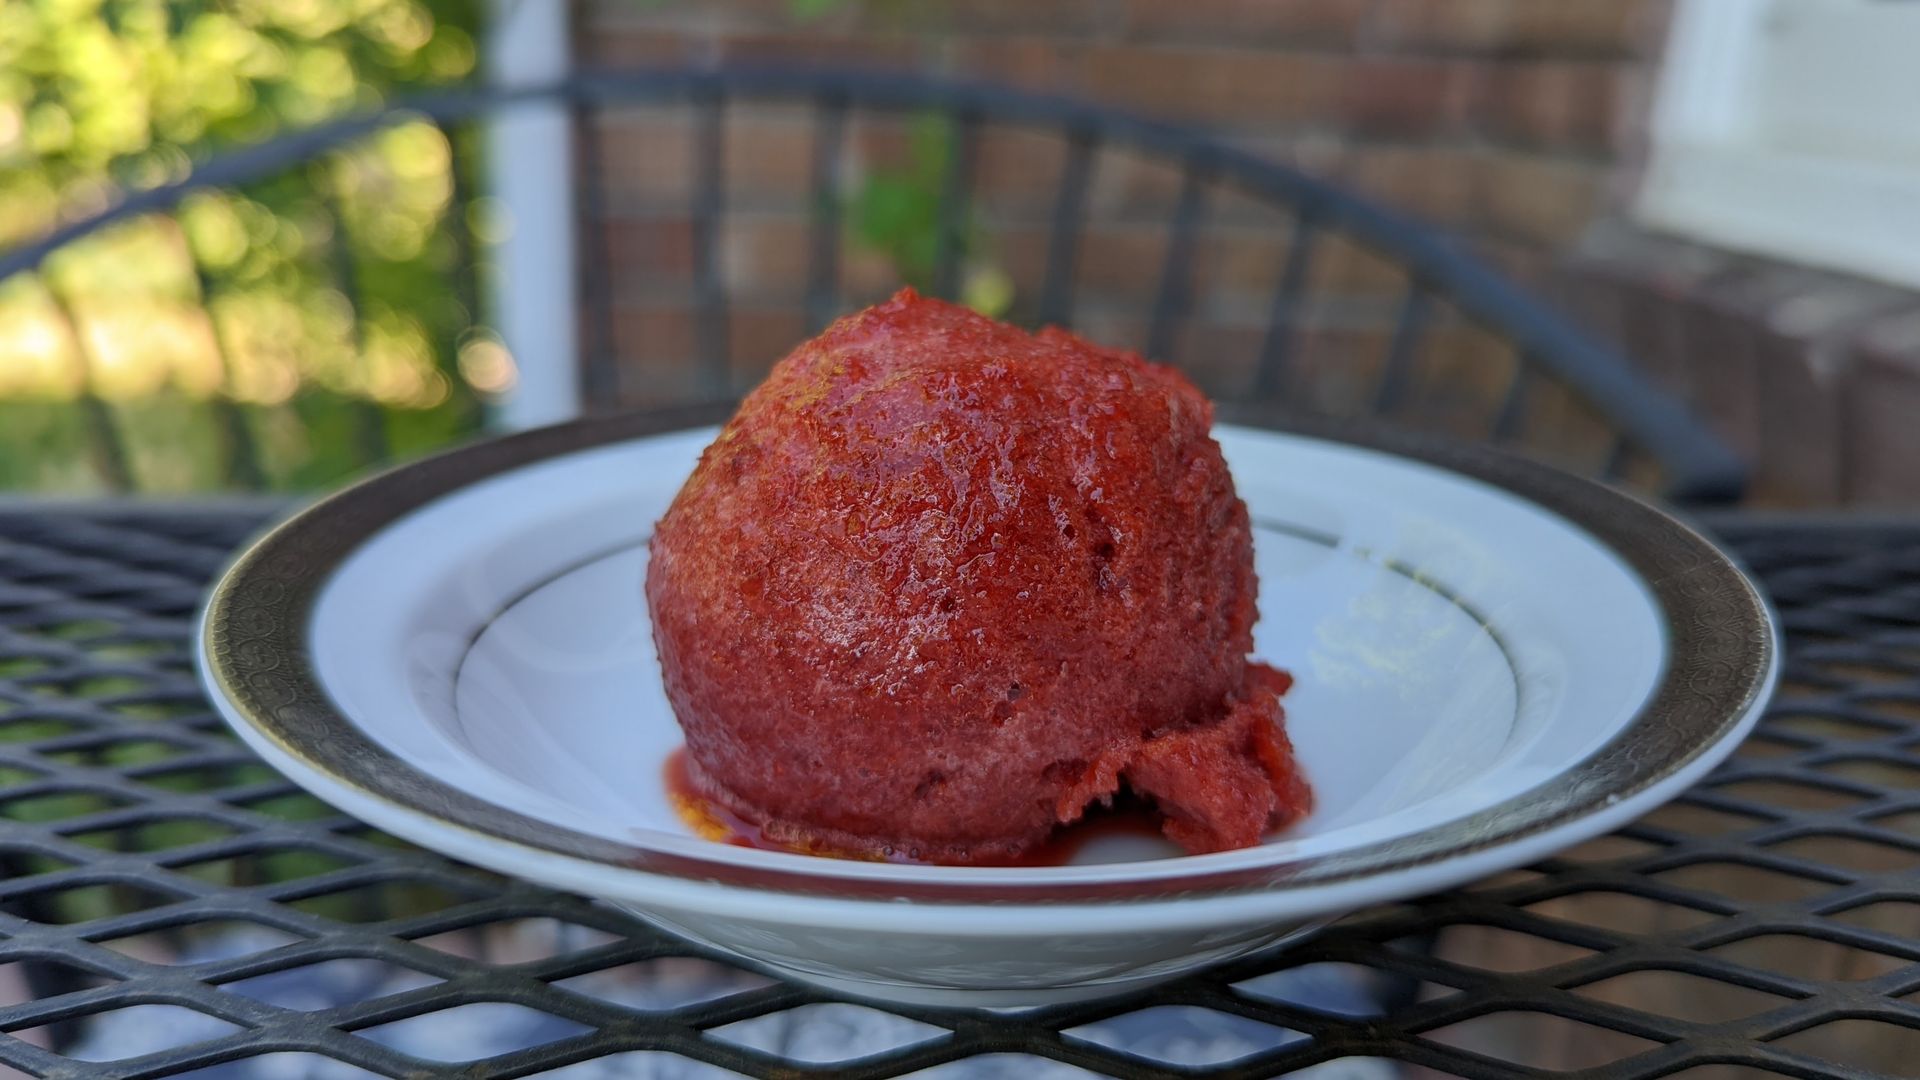 A scoop of sour cherry sorbet in a white bowl on a wrought-iron breakfast table with bricks and plants in the background.